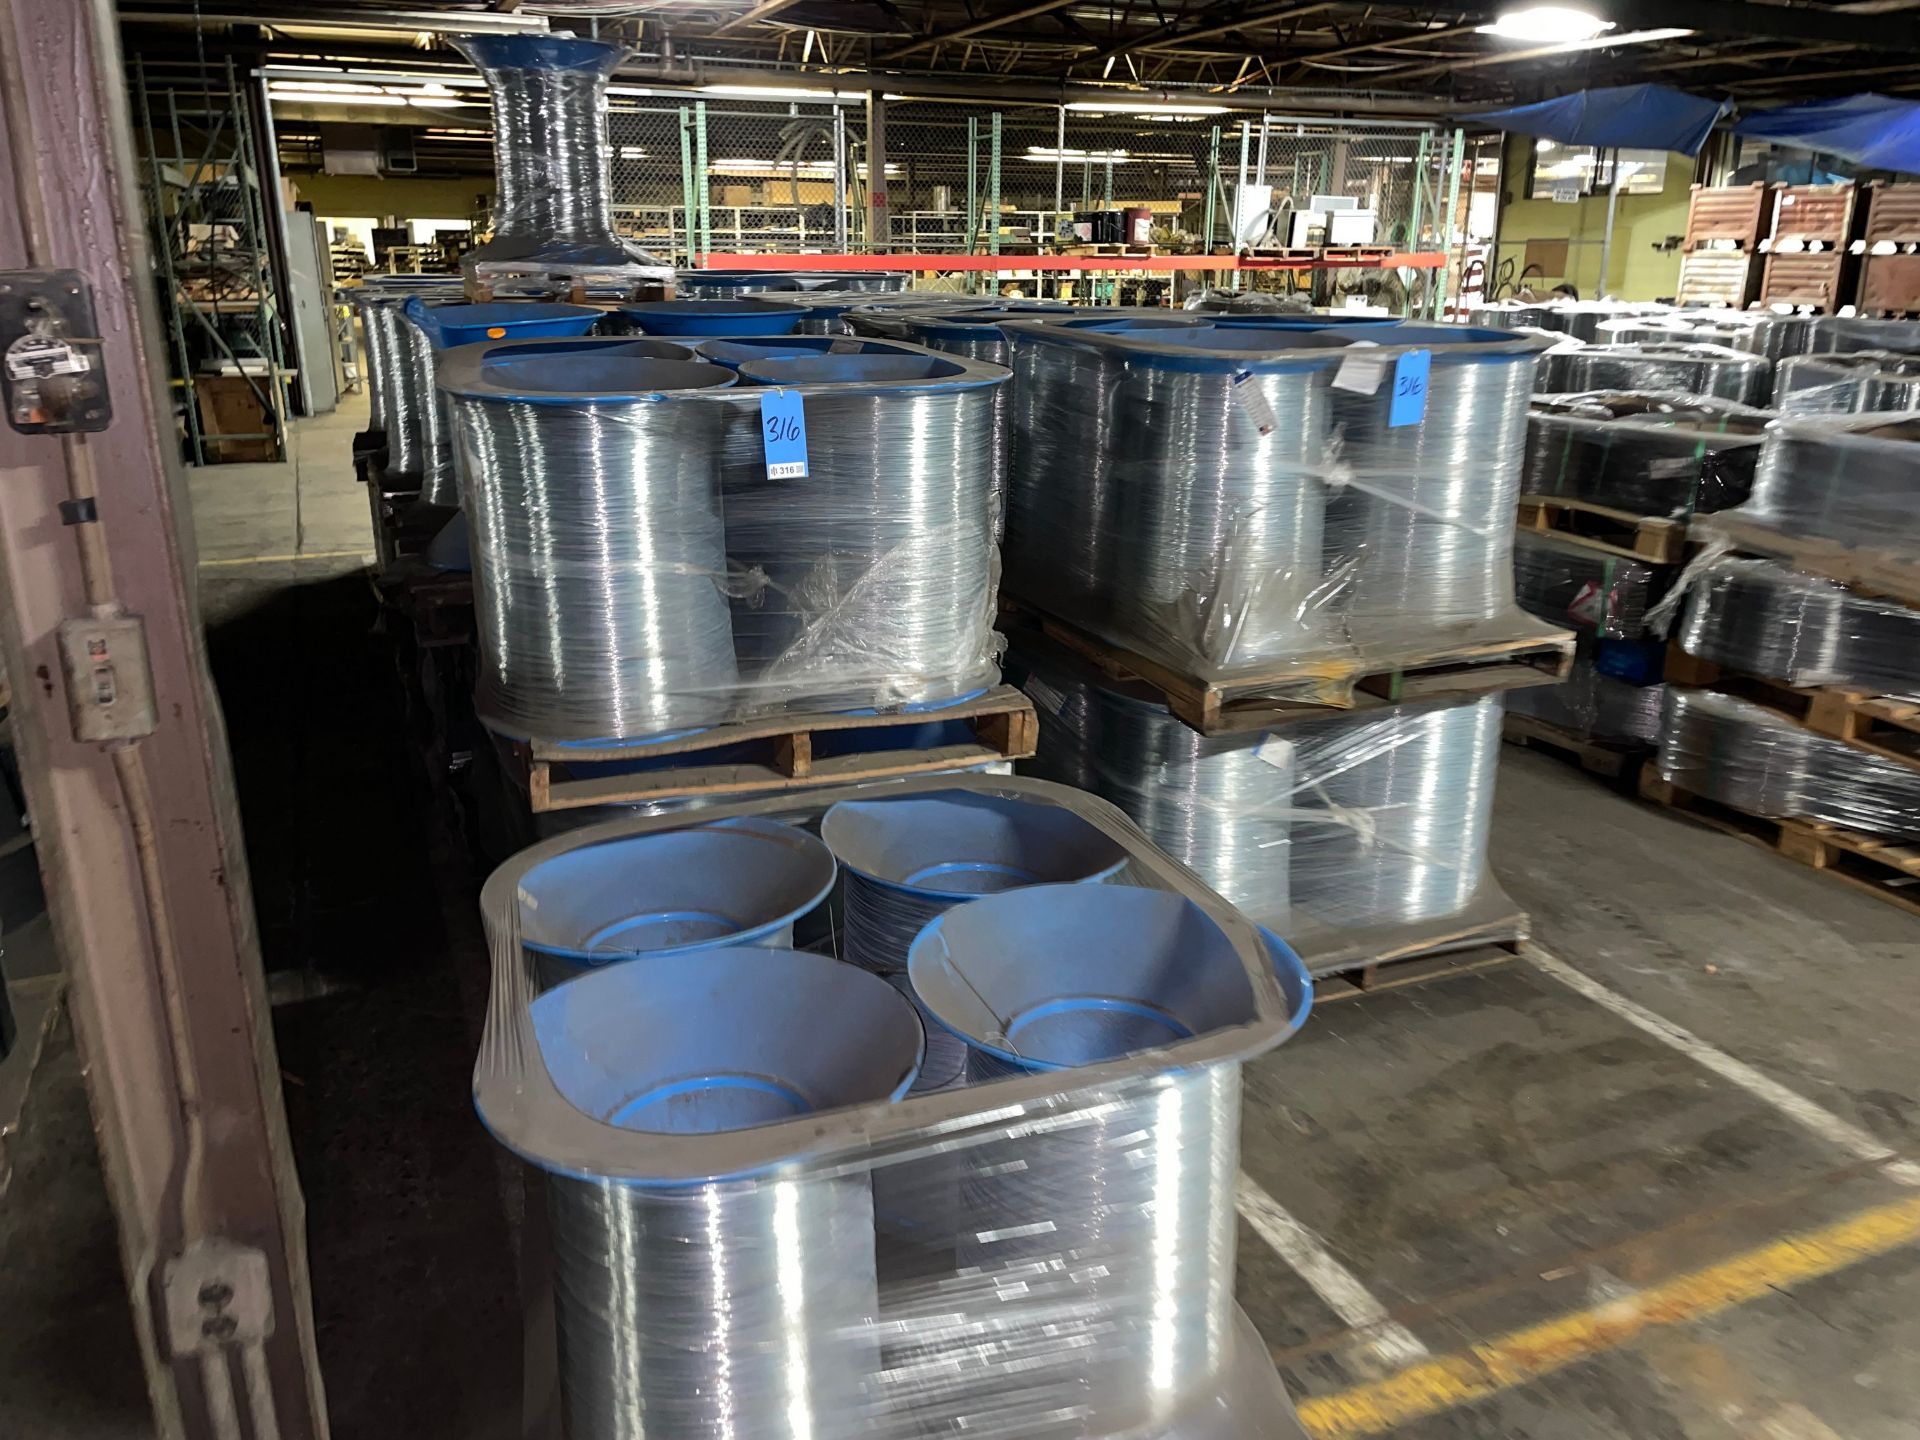 Appoximately (36) Pallets of .0378 Coated Galvanized Carbon Steel, Weighs approximately 55,000Lbs - Image 3 of 6